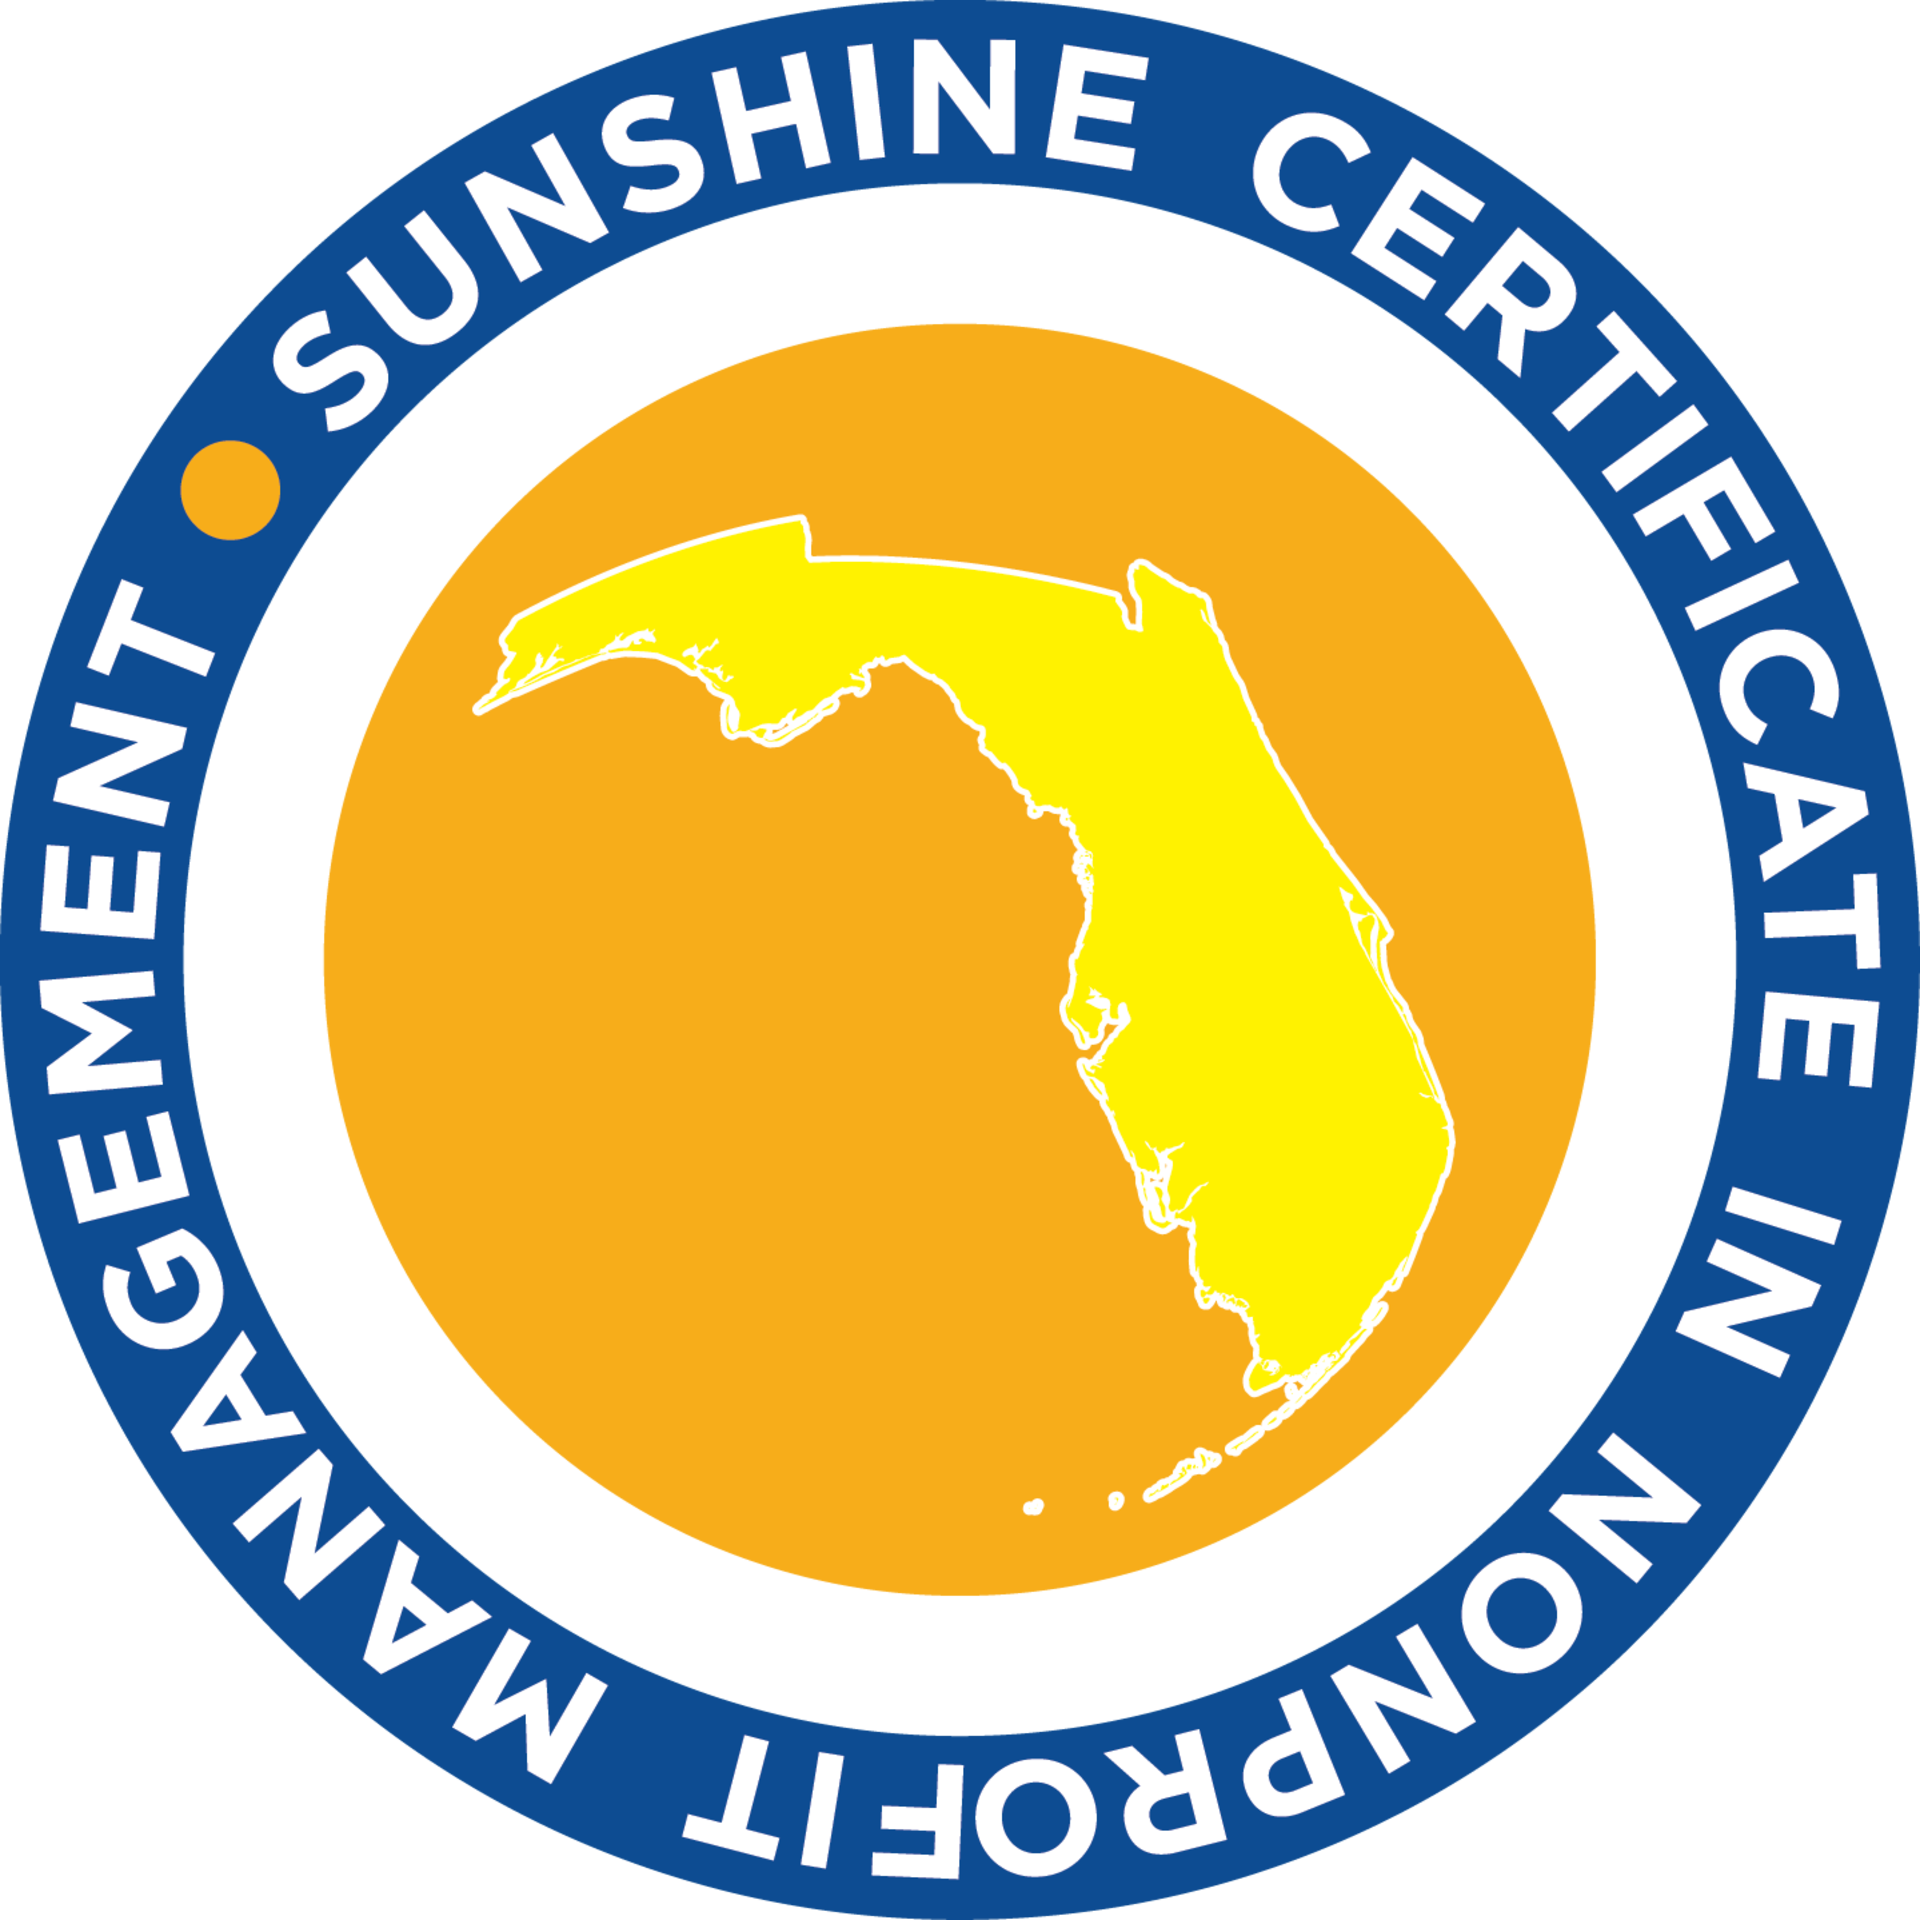  The Florida Association of Nonprofits’ Civic Engagement Class of the Sunshine Certificate in...